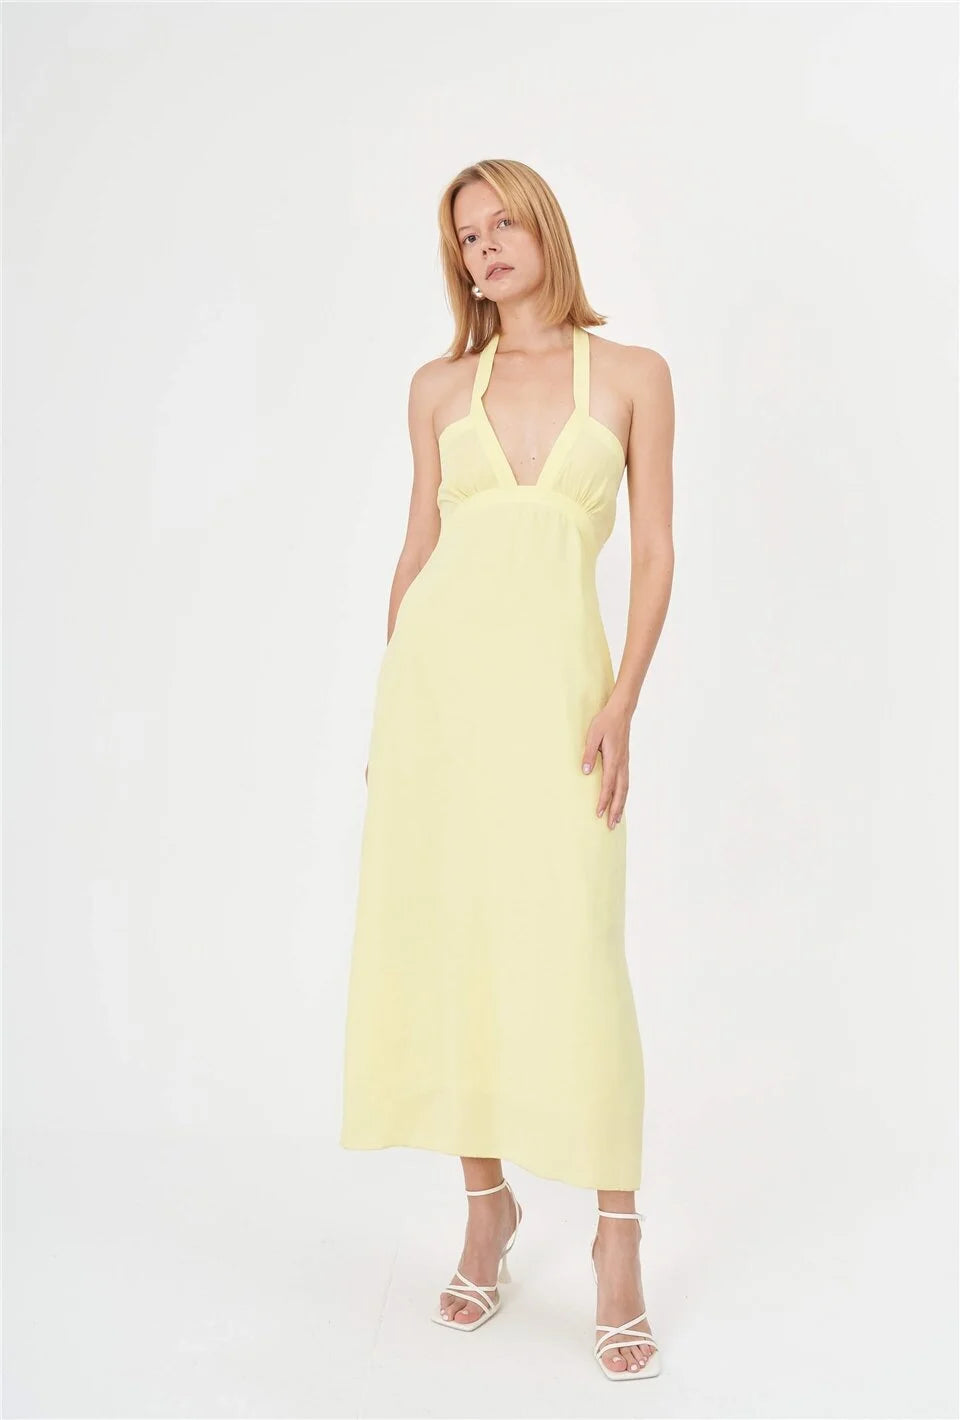 A sunny yellow summer dress with a halter neck, made from lightweight bio-based and organic fabric. This vibrant yellow dress is perfect for beach days, pool parties, social gatherings, and hot summer street style.